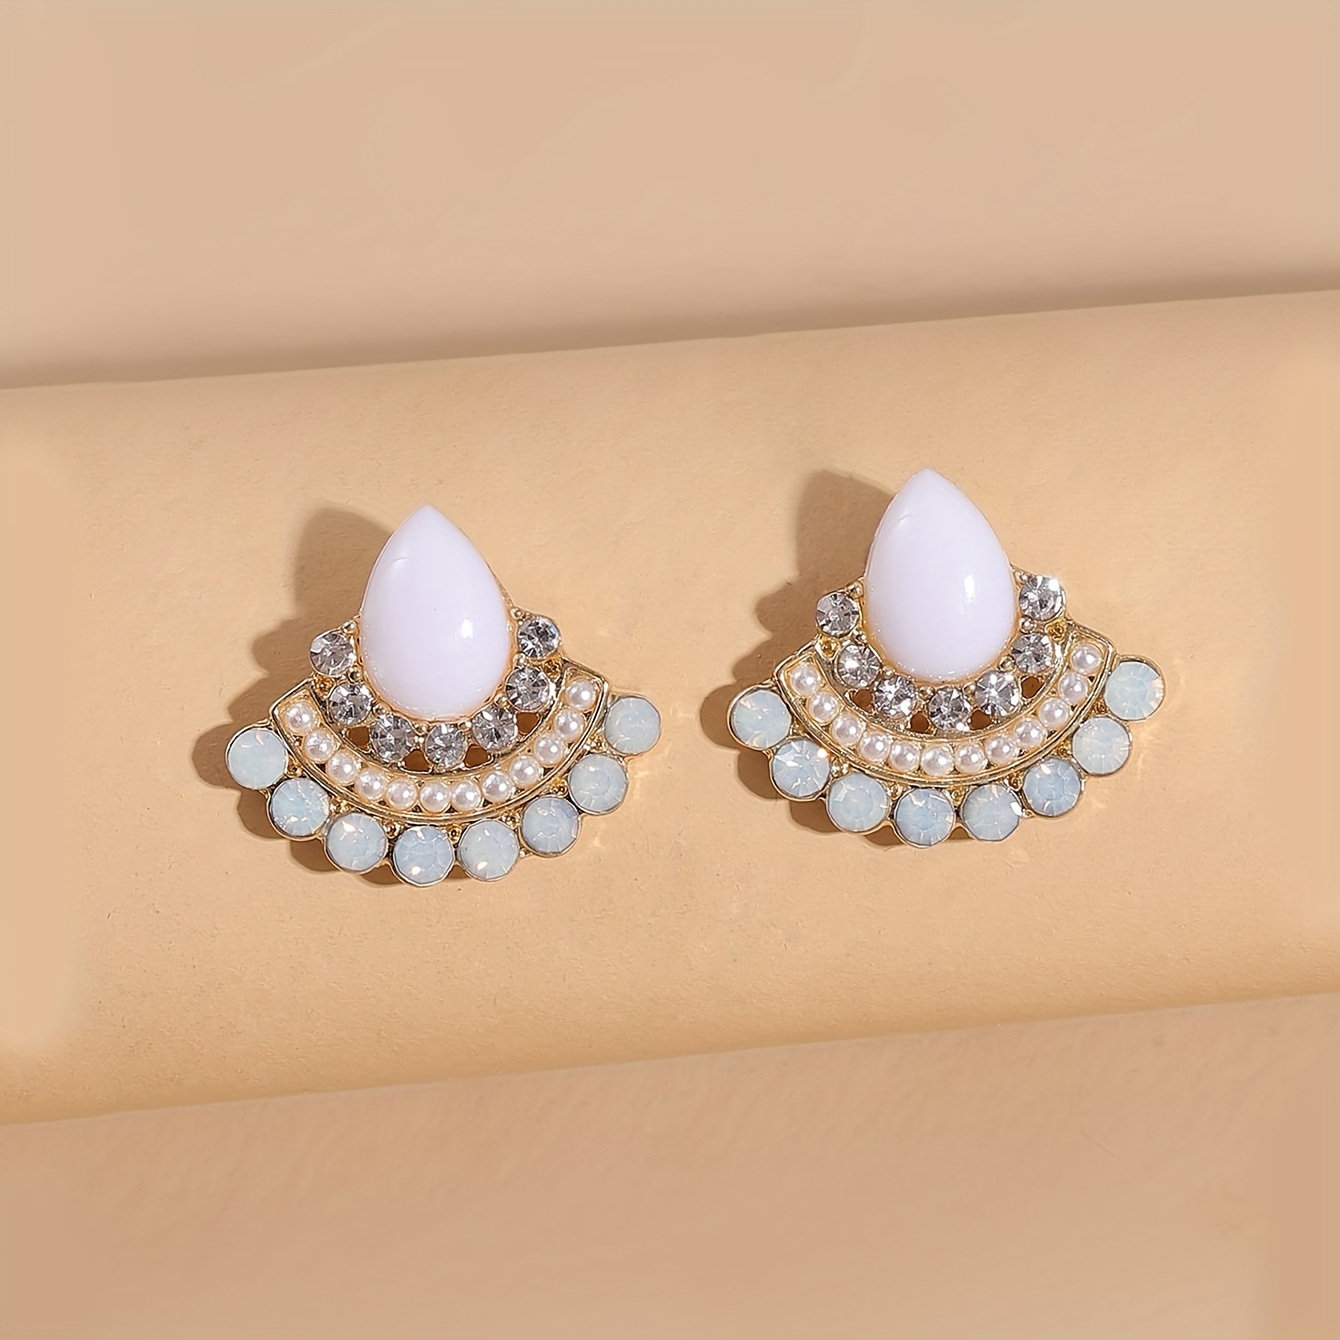 

Delicate Stud Earrings Zinc Alloy Jewelry Vintage Elegant Style Embellished With Imitation Pearl Unique Statement Female Ear Decor